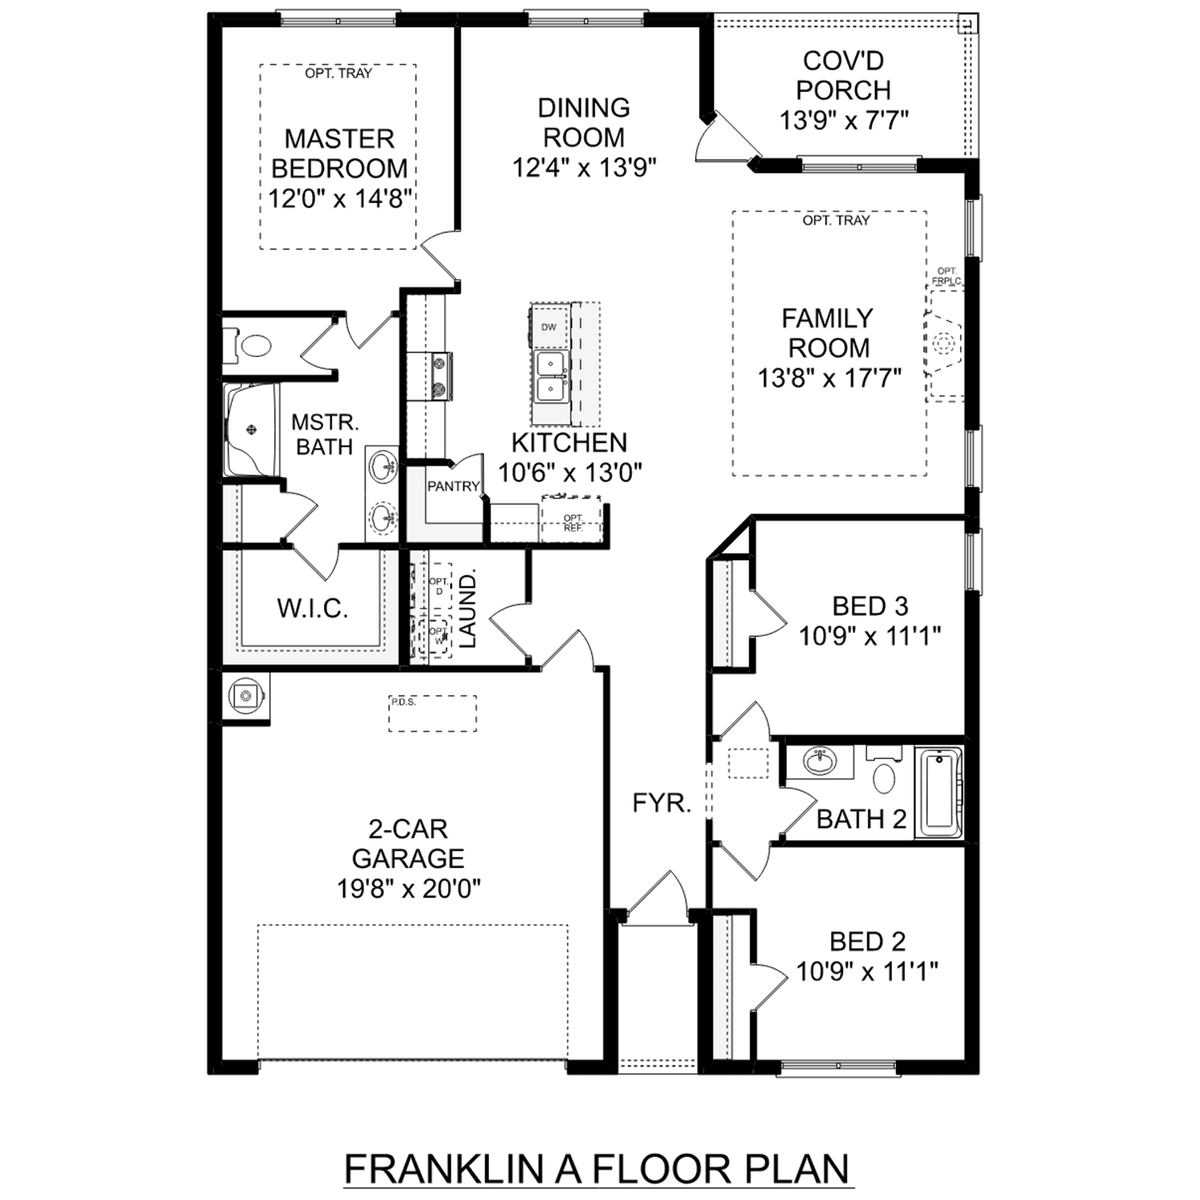 1 - The Franklin floor plan layout for 212 Sunny Springs Court in Davidson Homes' Flint Meadows community.